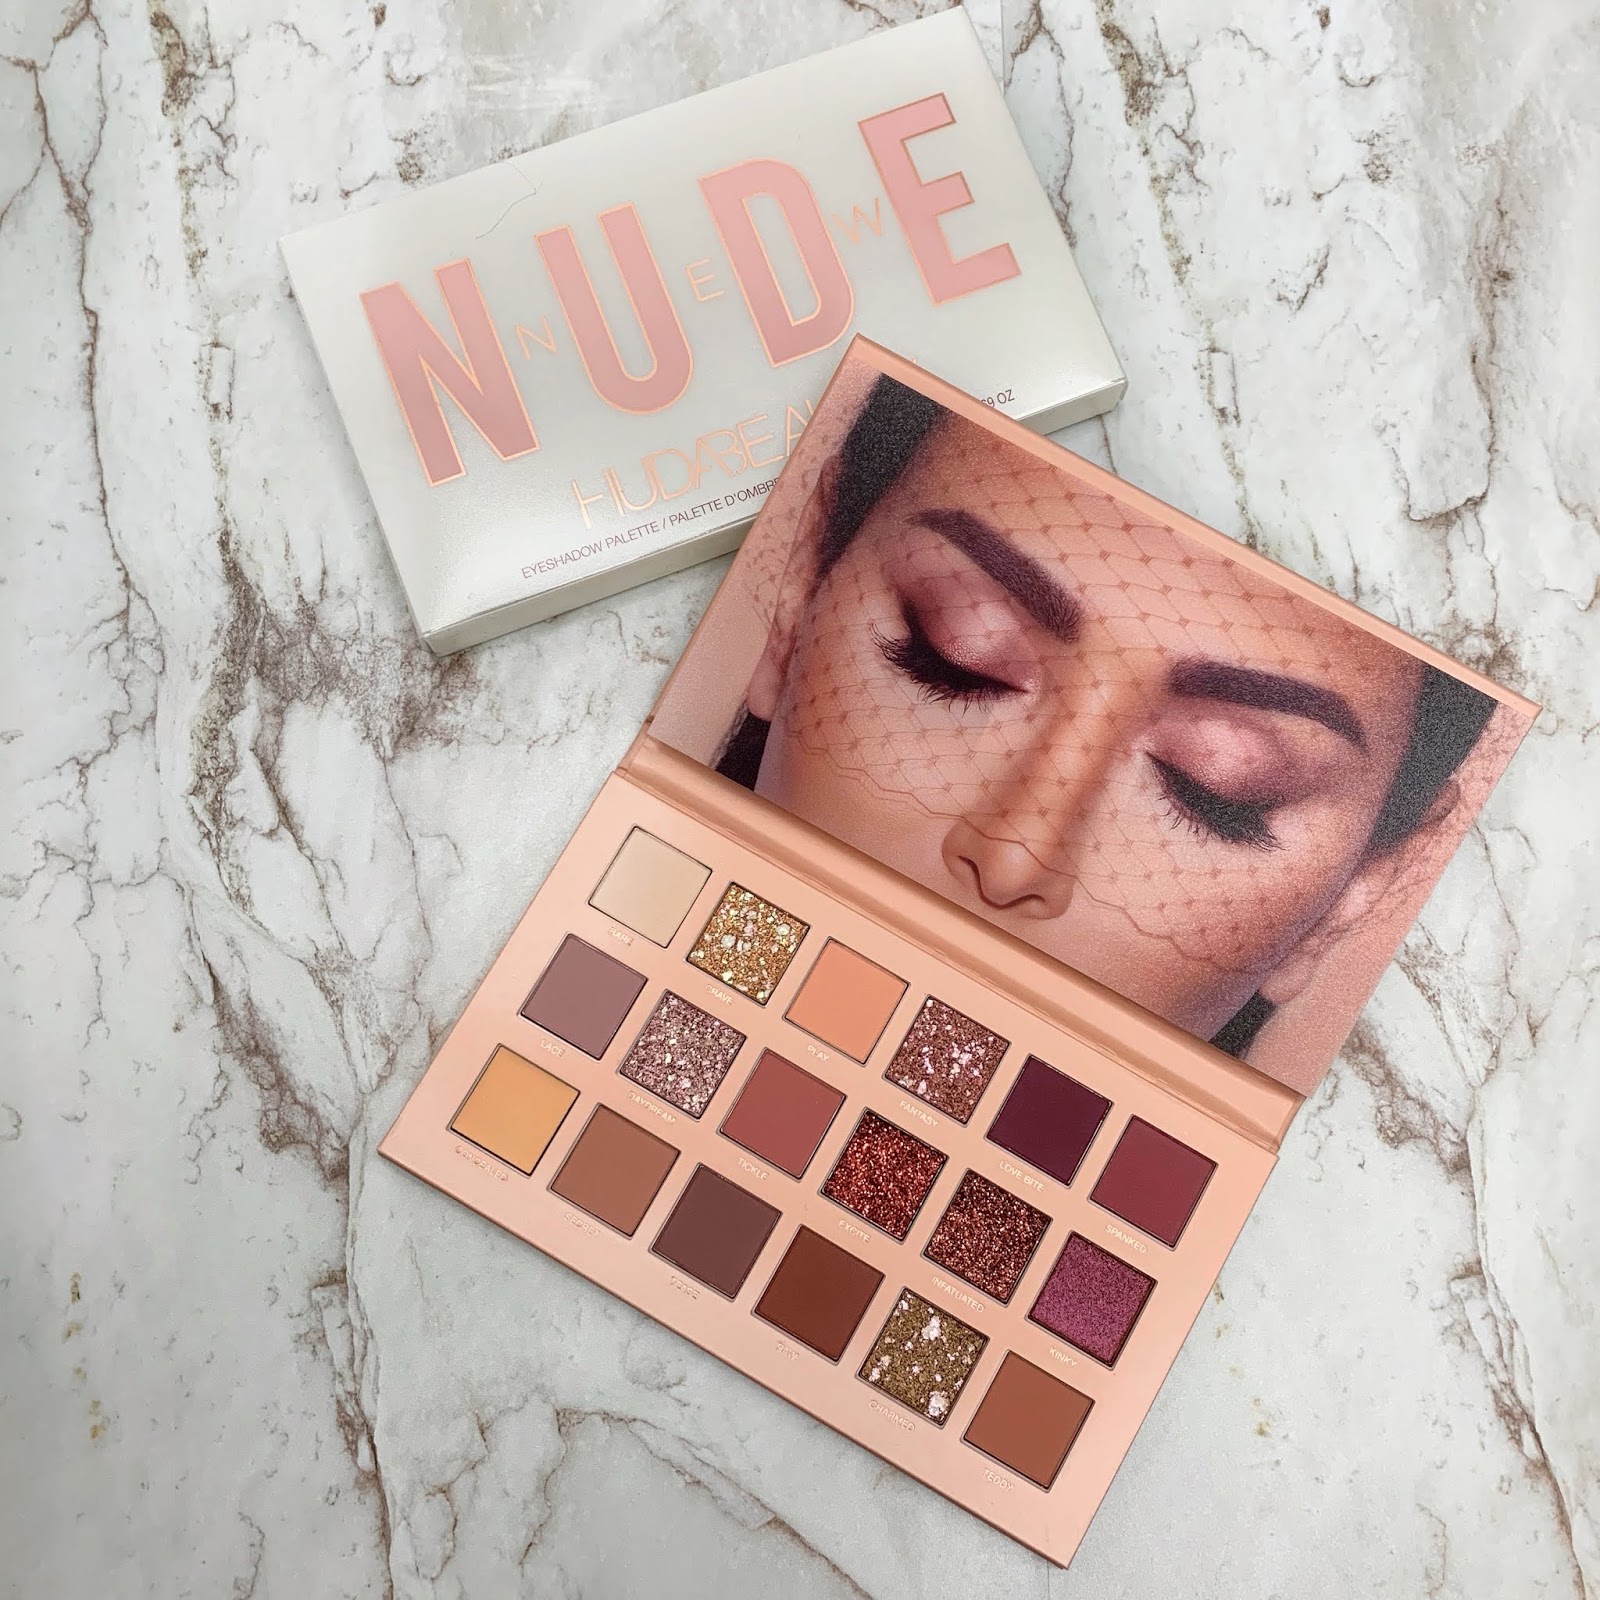 Huda Beauty New Nude Palette Review + Swatches! | mehshake.